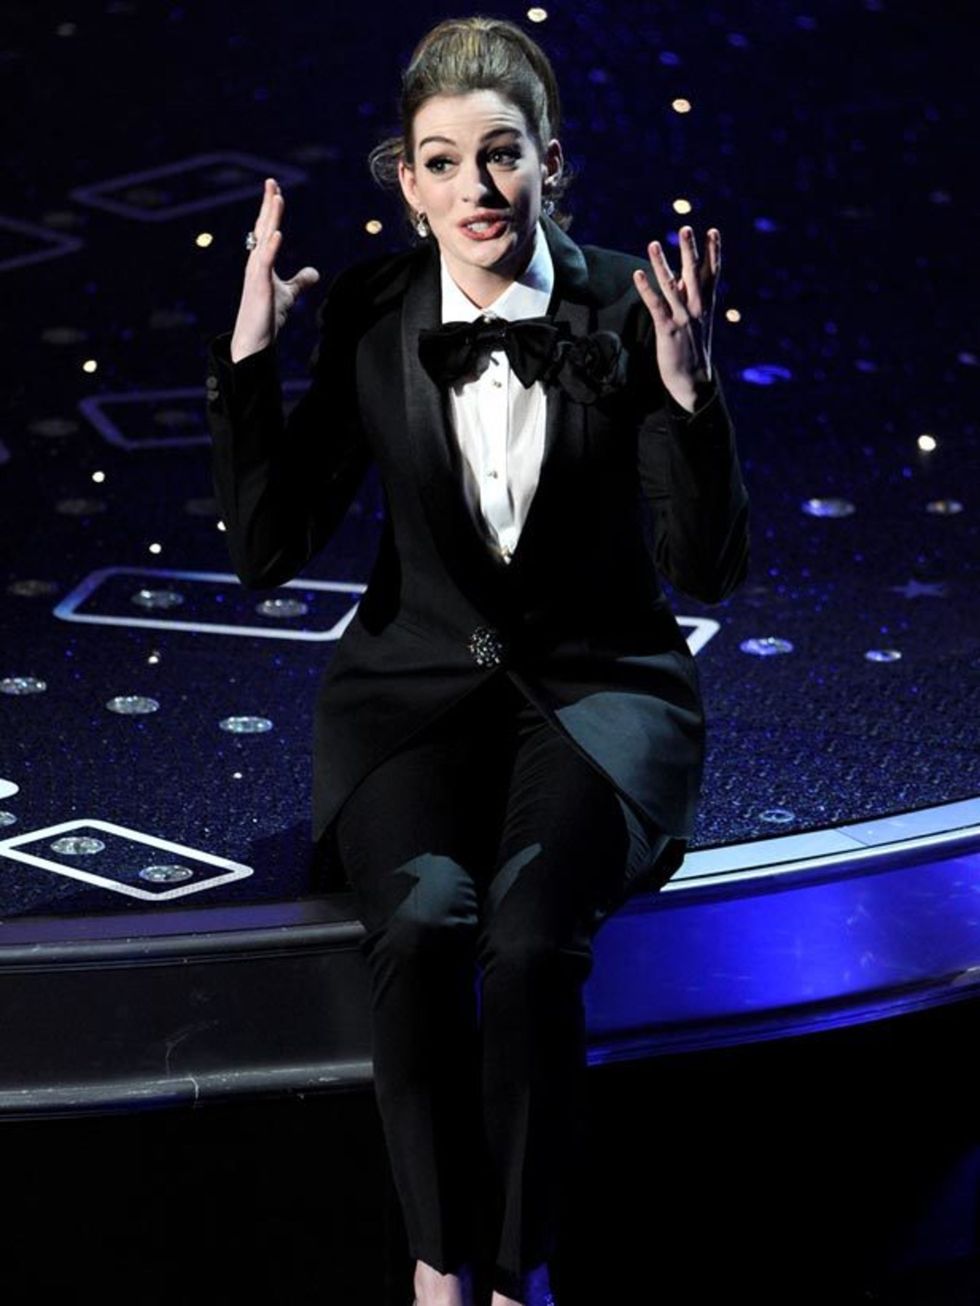 <p><a href="http://www.elleuk.com/starstyle/style-files/%28section%29/anne-hathaway">Anne Hathaway</a> in <a href="http://www.elleuk.com/news/fashion-news/see-tom-ford-s-star-studded-show">Tom Ford</a></p>